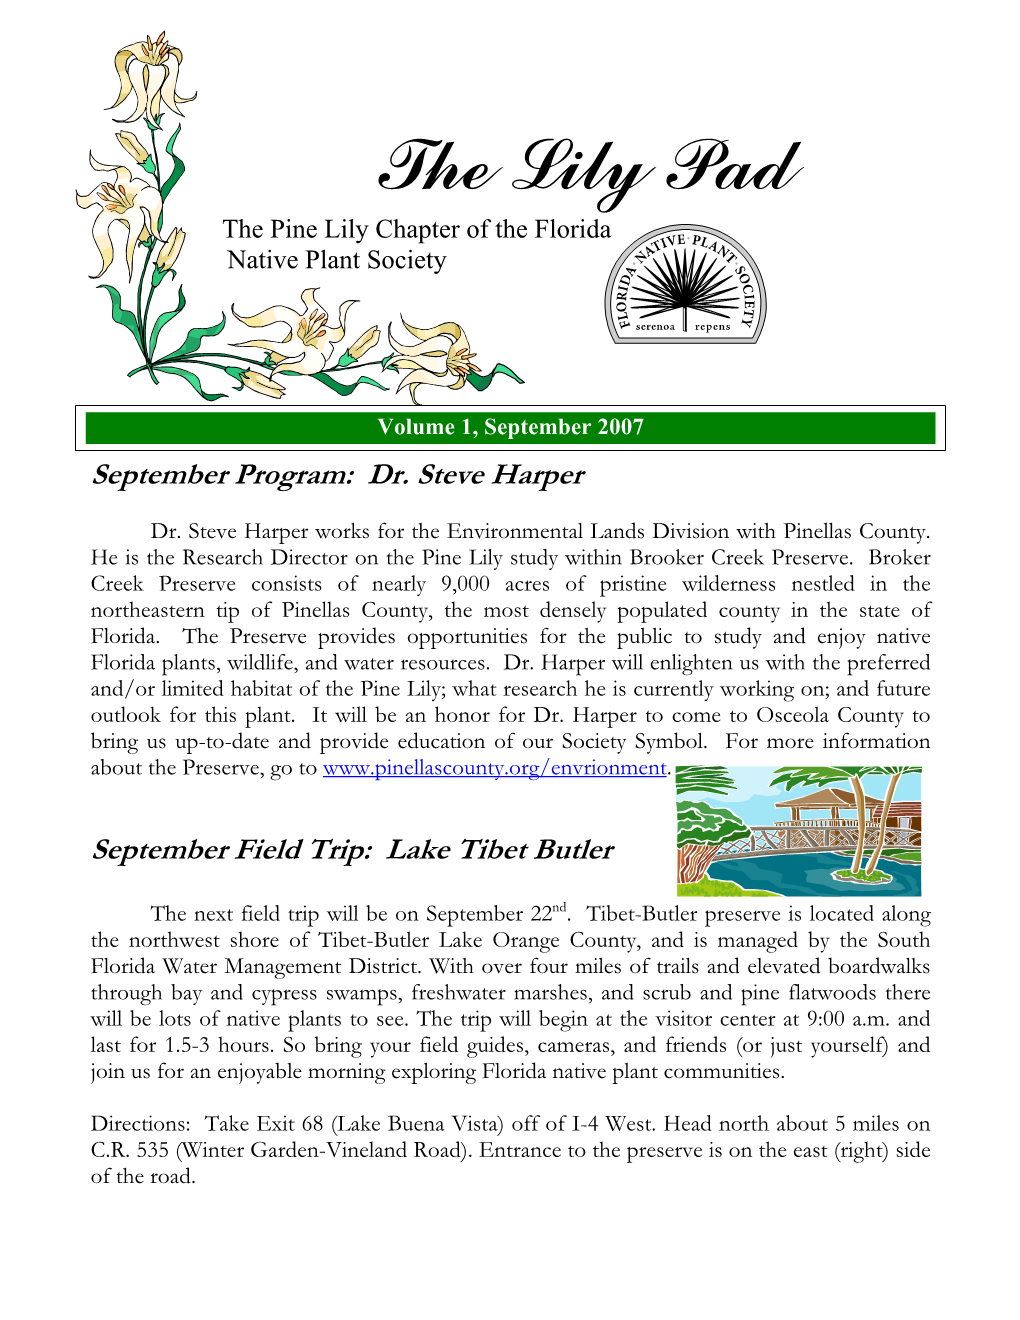 The Lily Pad the Pine Lily Chapter of the Florida Native Plant Society